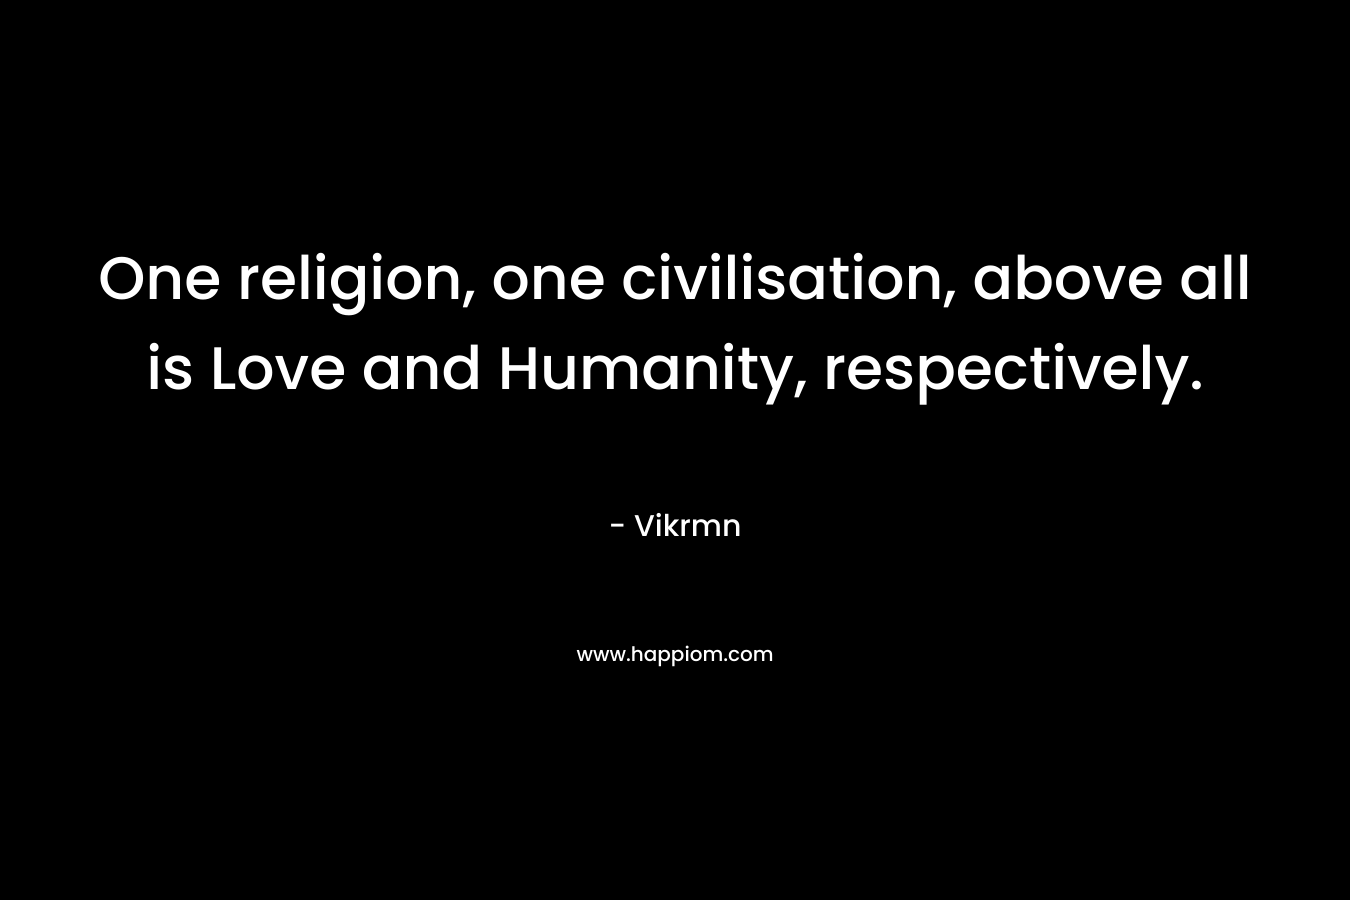 One religion, one civilisation, above all is Love and Humanity, respectively. – Vikrmn